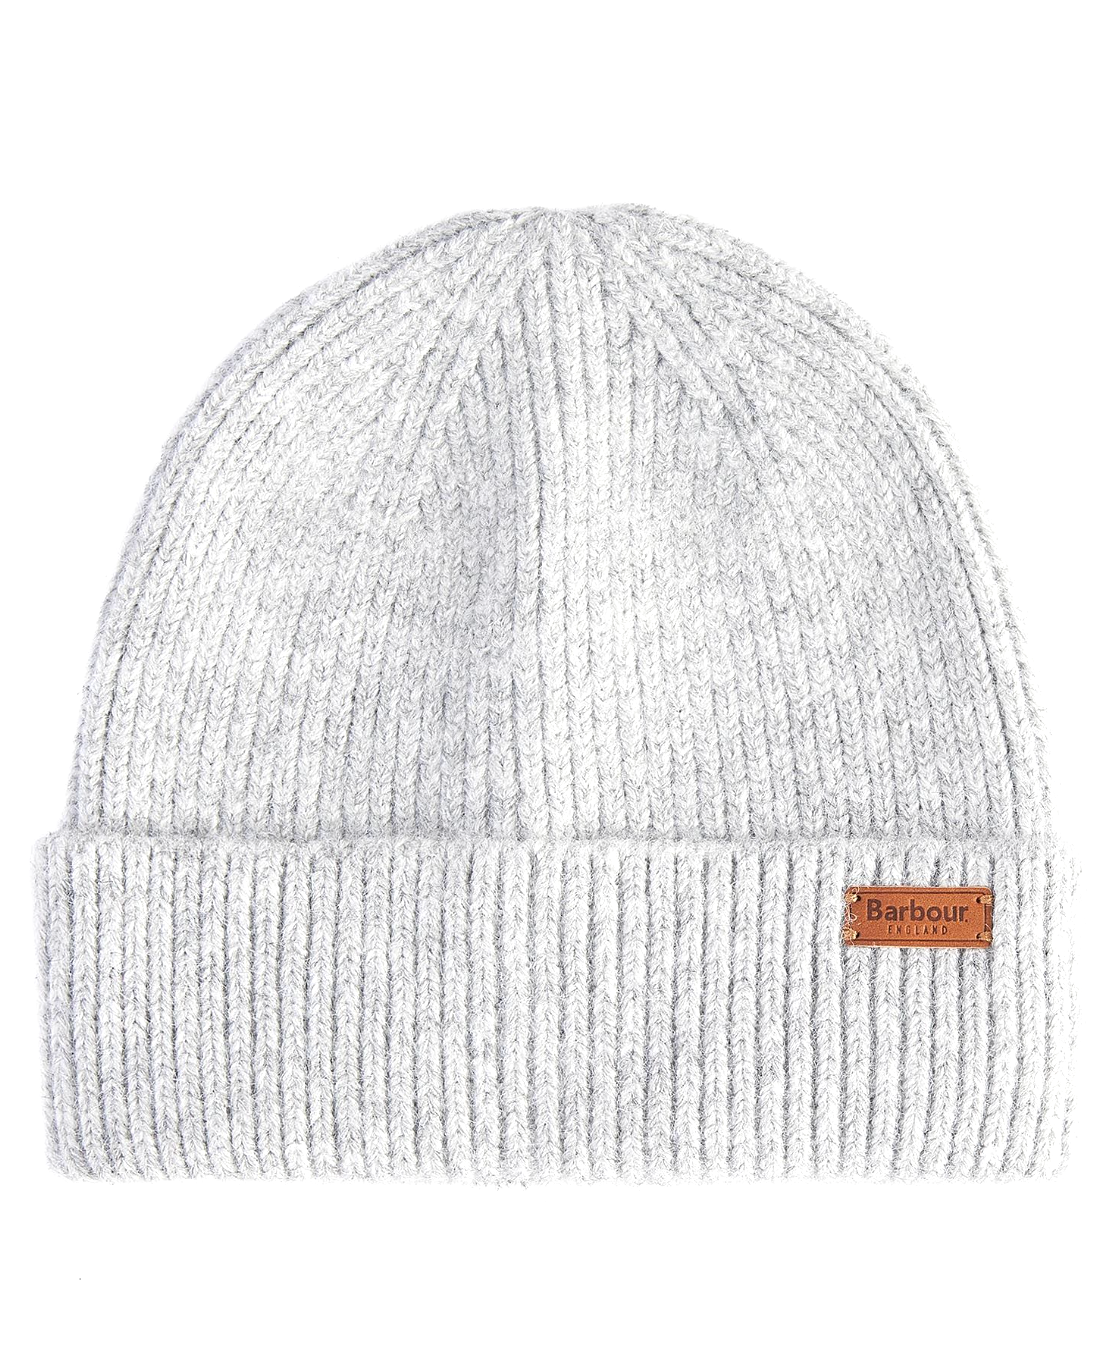 Ws Barbour Pendle Beanie